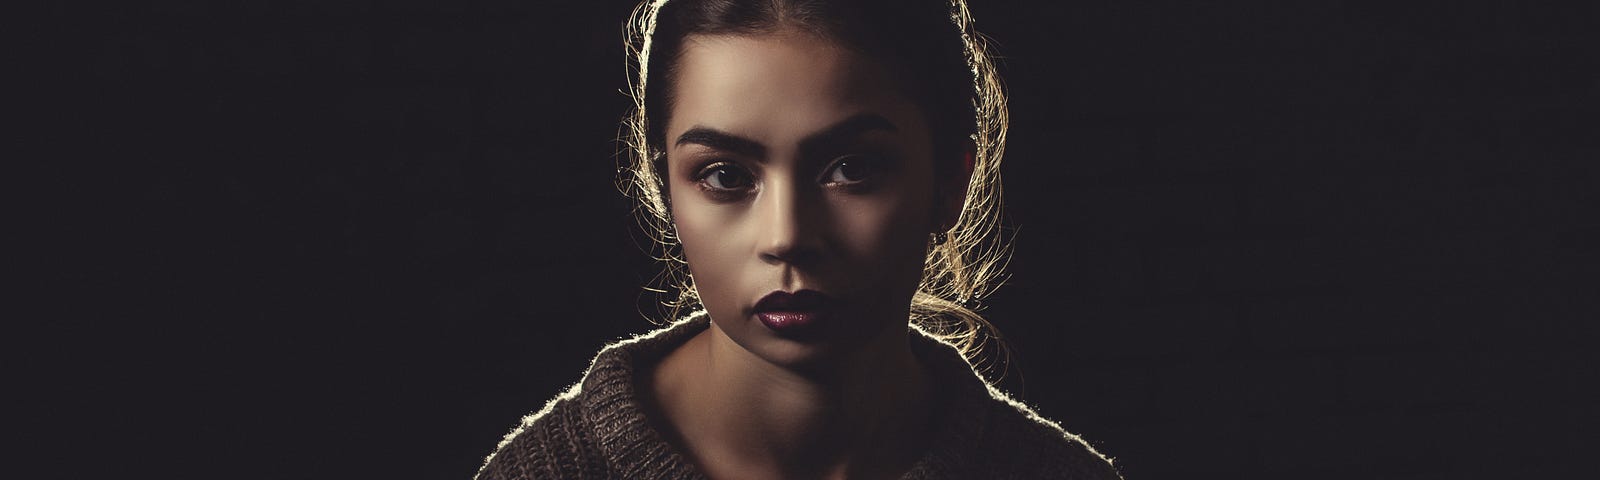 Portrait of a young woman against a black background.